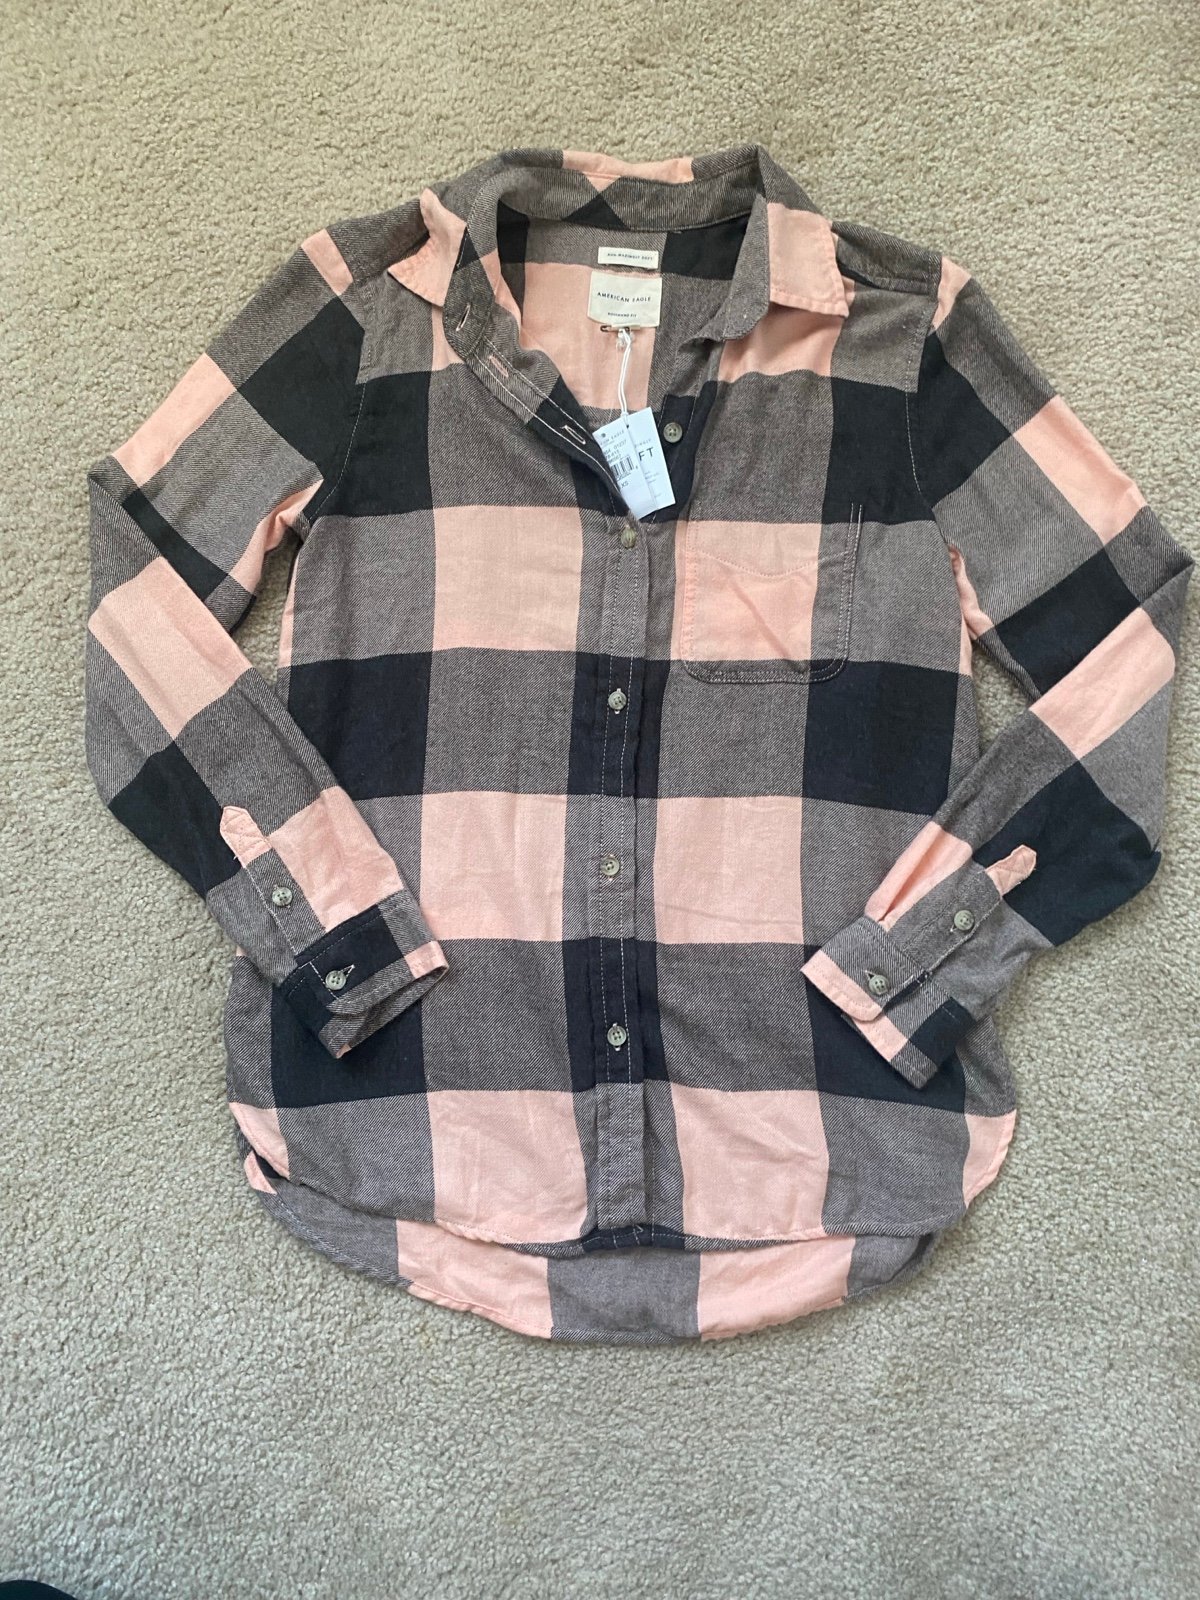 reasonable price American Eagle flannel - NWT - size XS